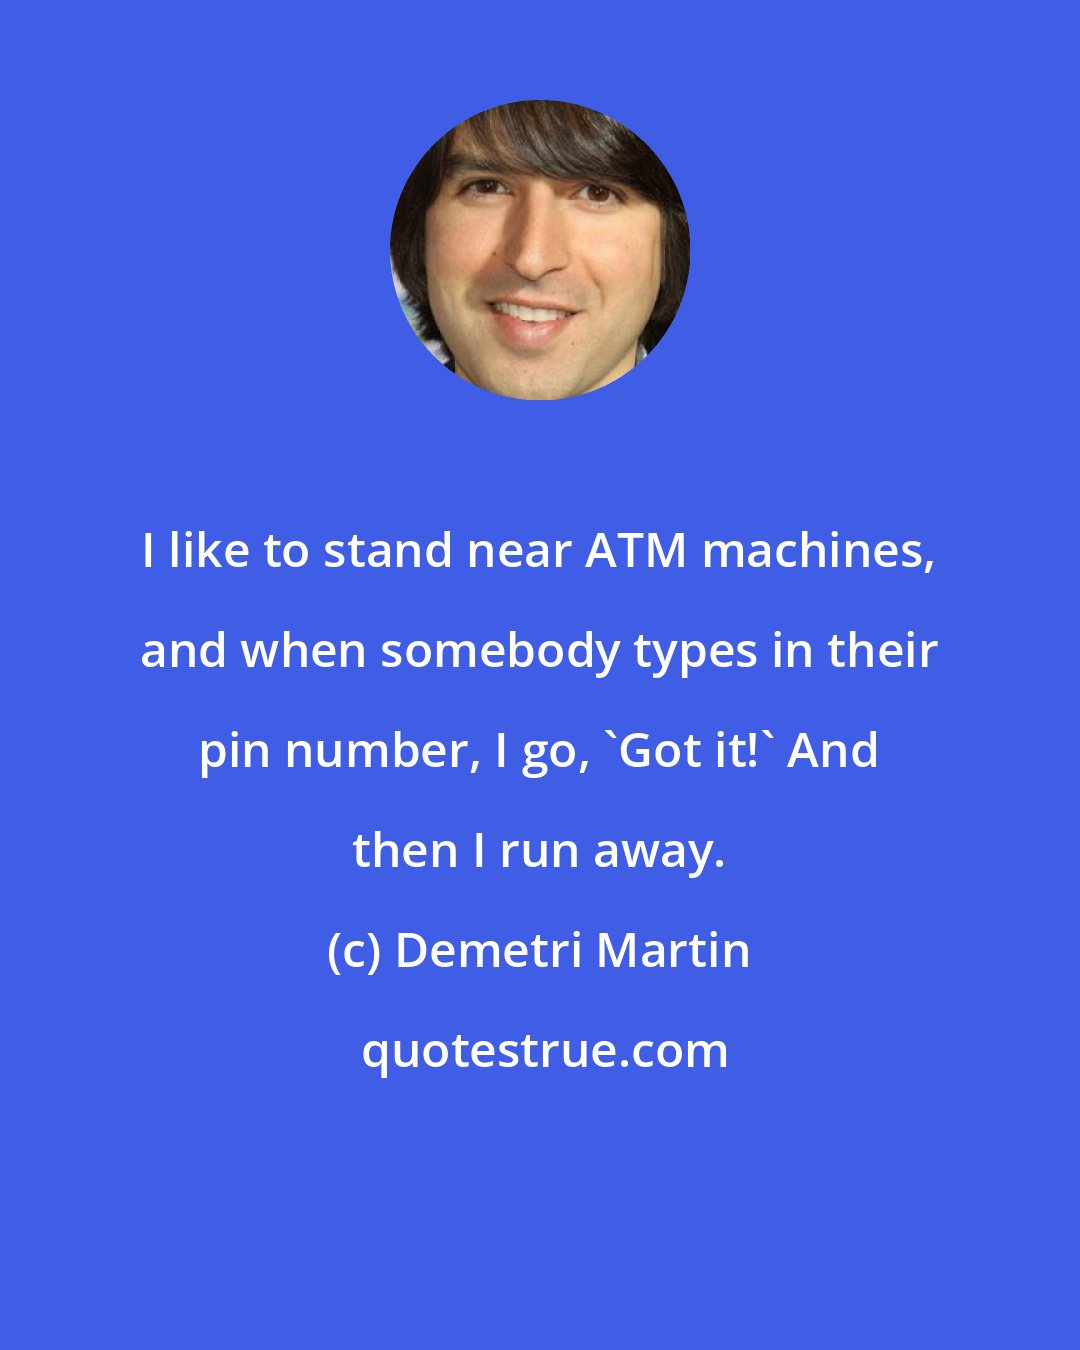 Demetri Martin: I like to stand near ATM machines, and when somebody types in their pin number, I go, 'Got it!' And then I run away.